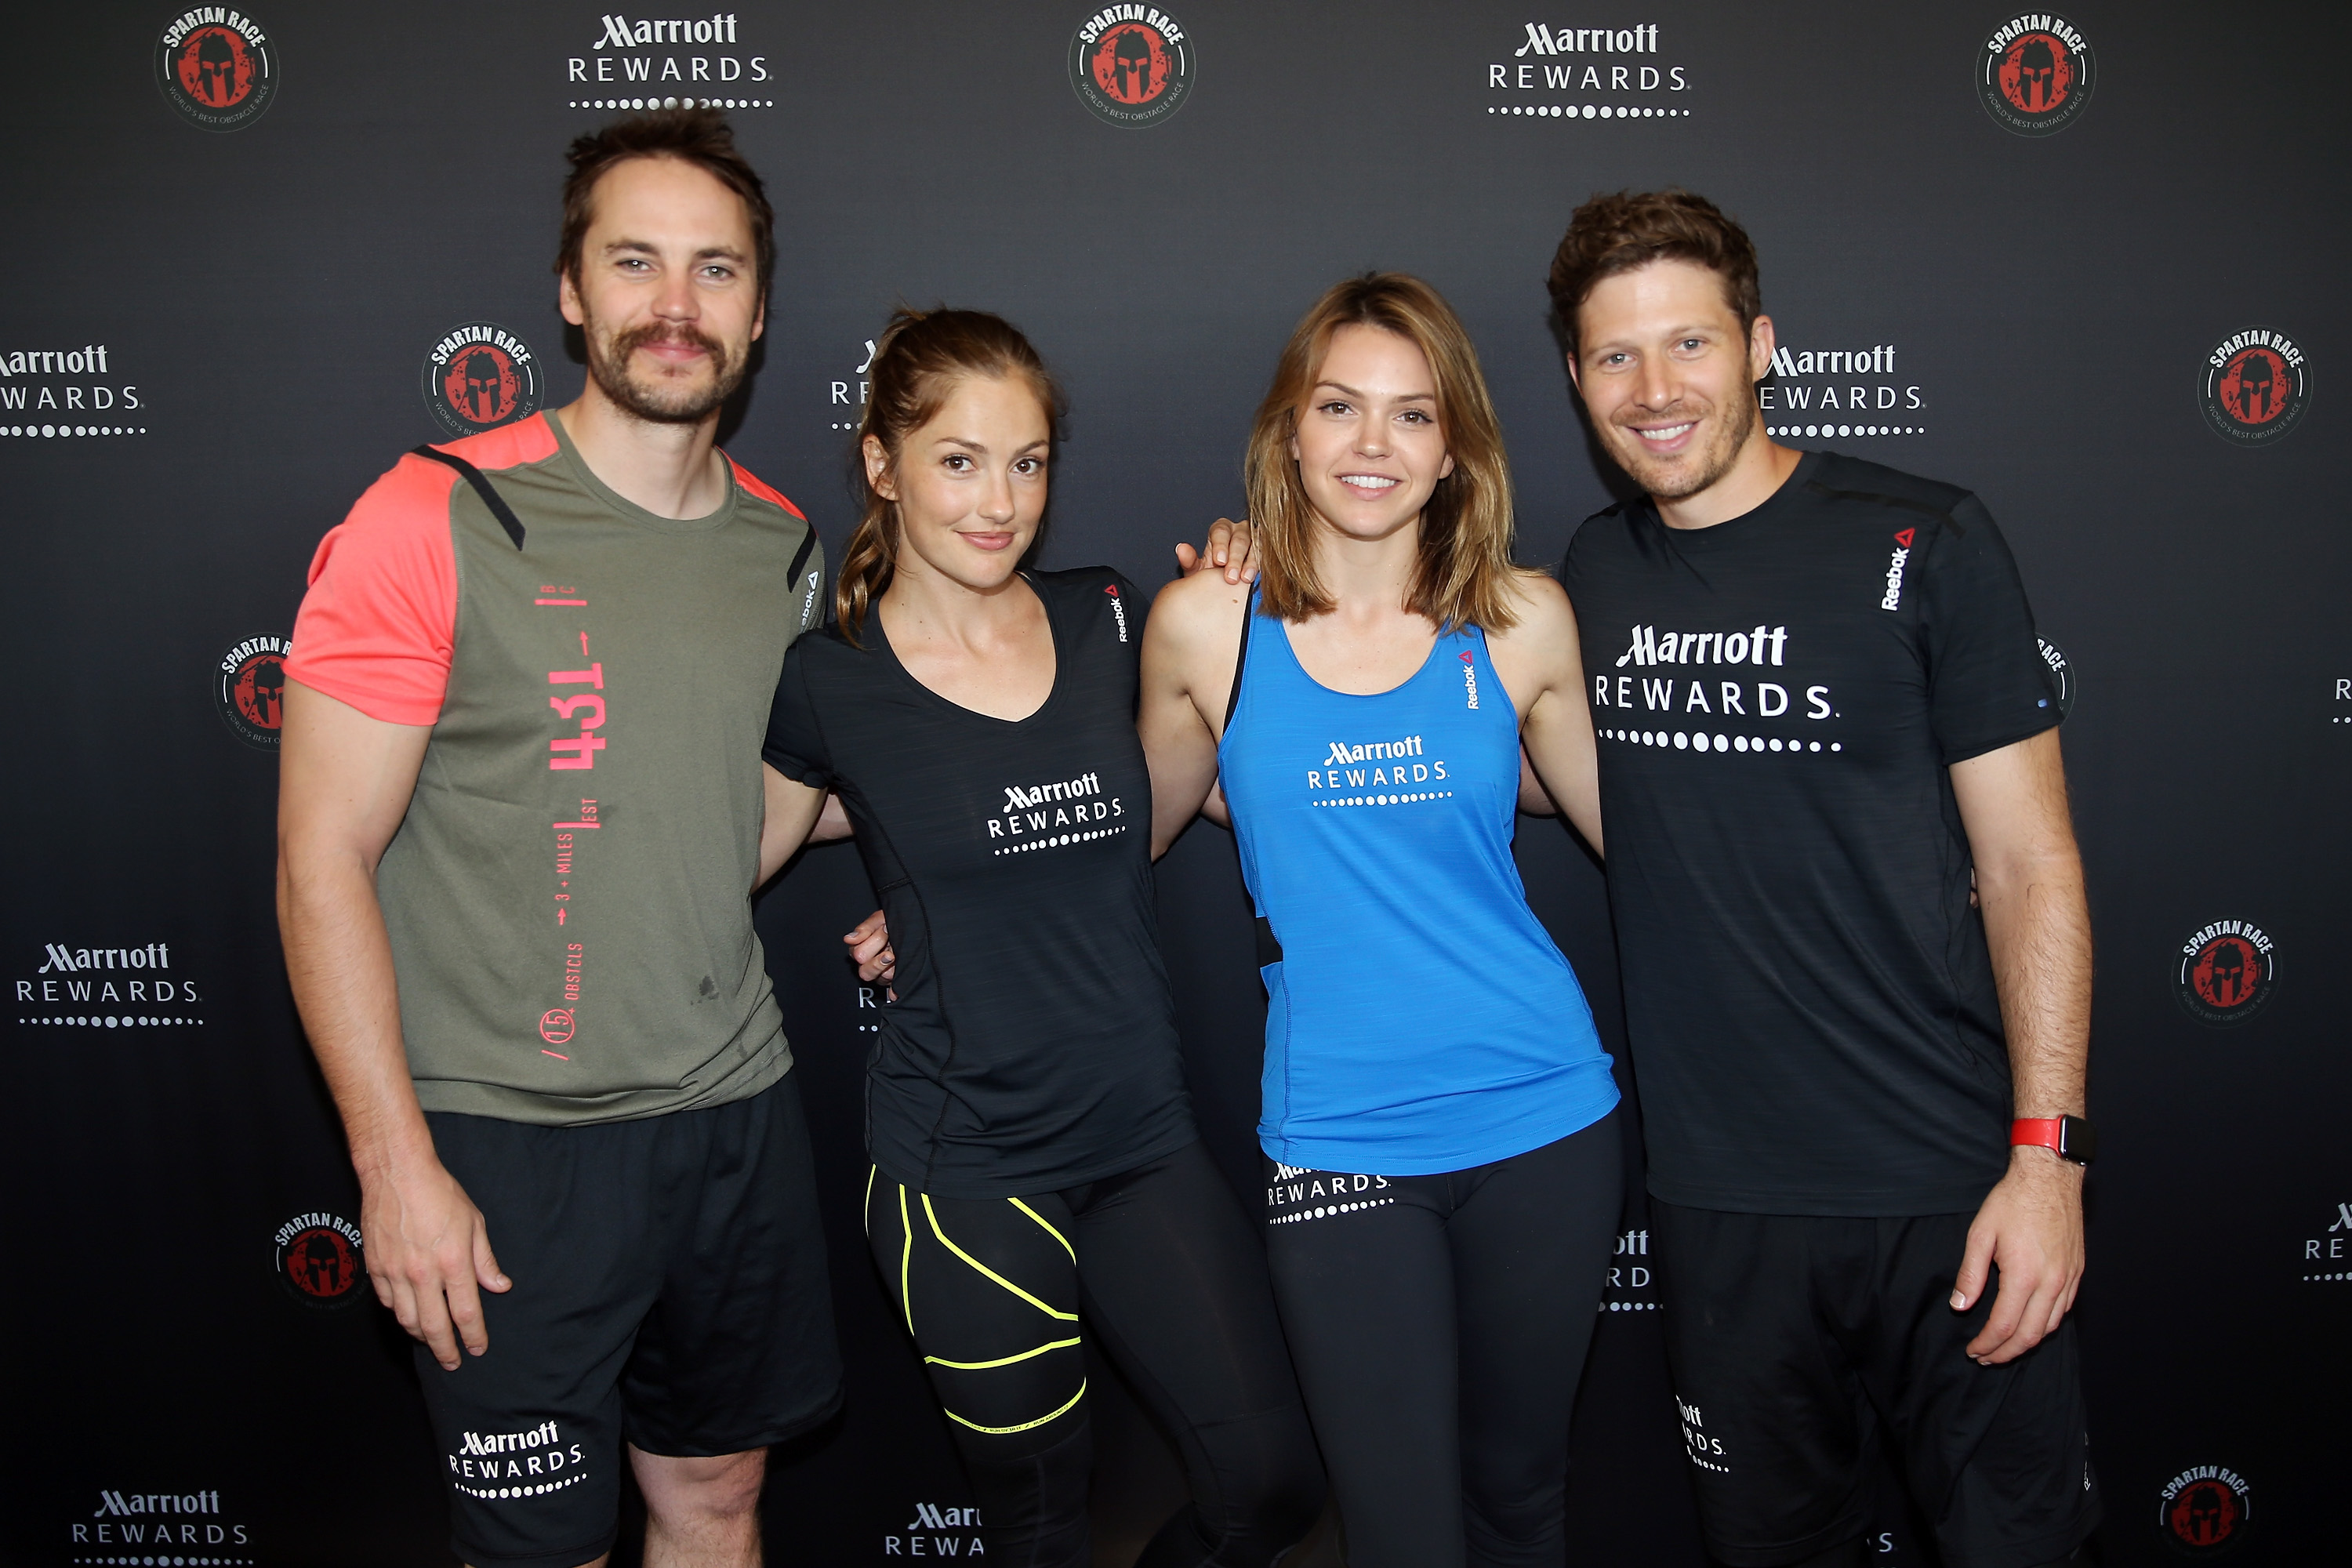 RICHMOND, IL - JUNE 11:  Taylor Kitsch, Minka Kelly, Aimee Teegarden and Zach Gilford attend as Marriott Rewards reunites Taylor Kitsch, Minka Kelly, Zach Gilford and Aimee Teegarden of "Friday Night Lights" for Spartan Super Race on June 11, 2016 in Richmond, Illinois.  (Photo by Tasos Katopodis/Getty Images for Marriott) (Tasos Katopodis — Getty Images)